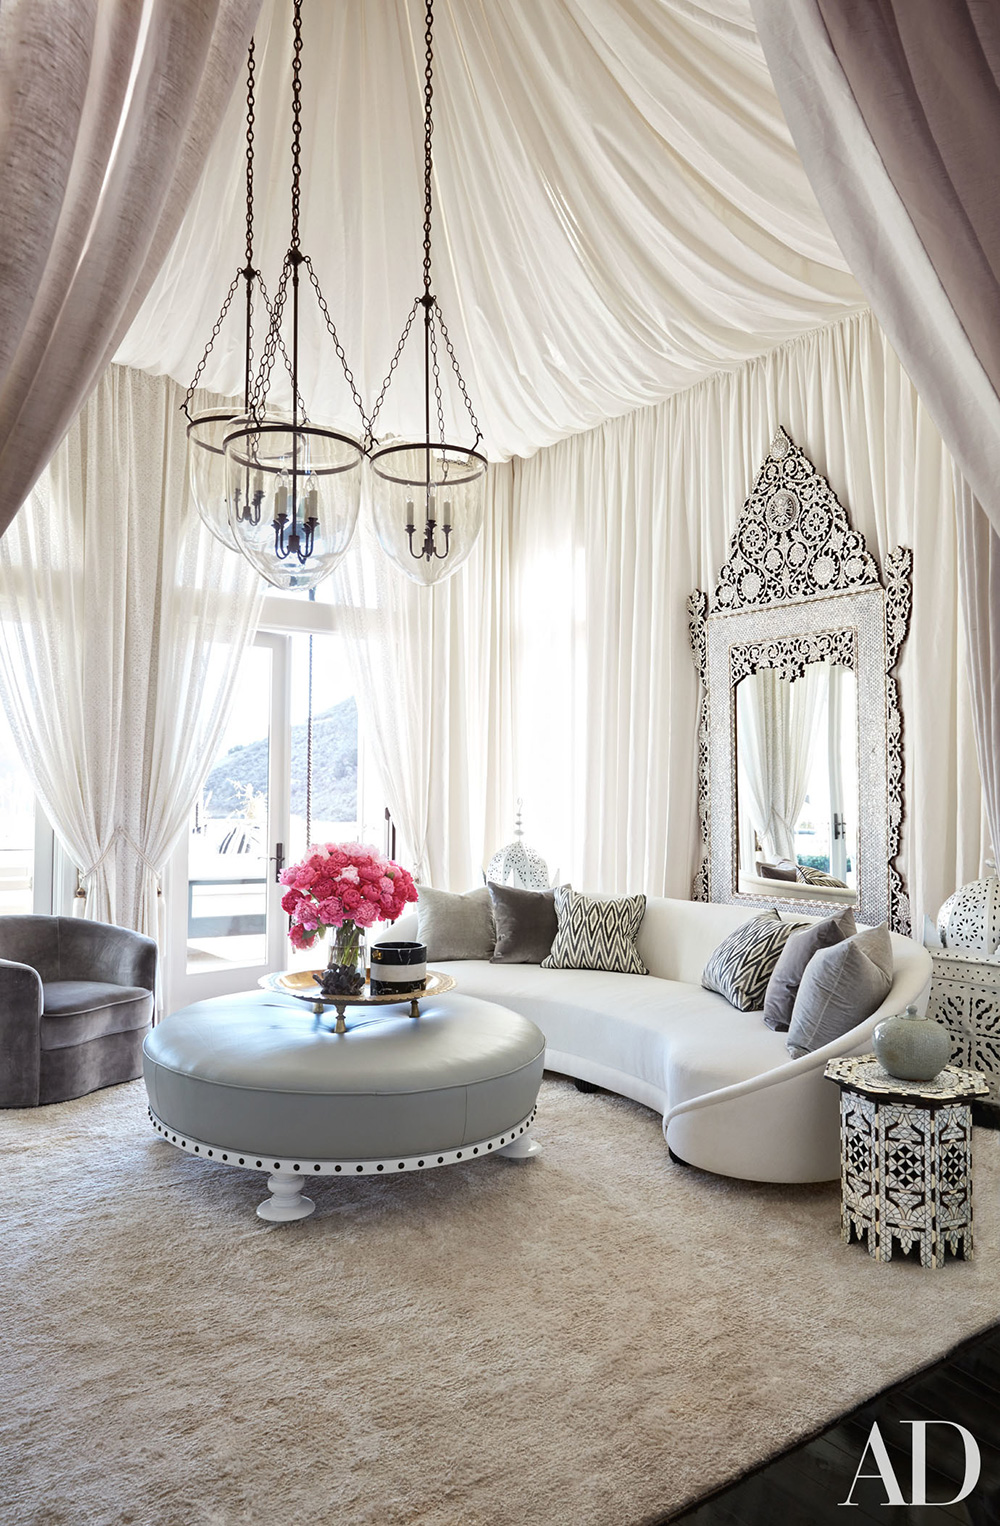 Khloe's decorator Martyn Lawrence Bullard tented Khloe's living room with a sheer fabric of his own design.